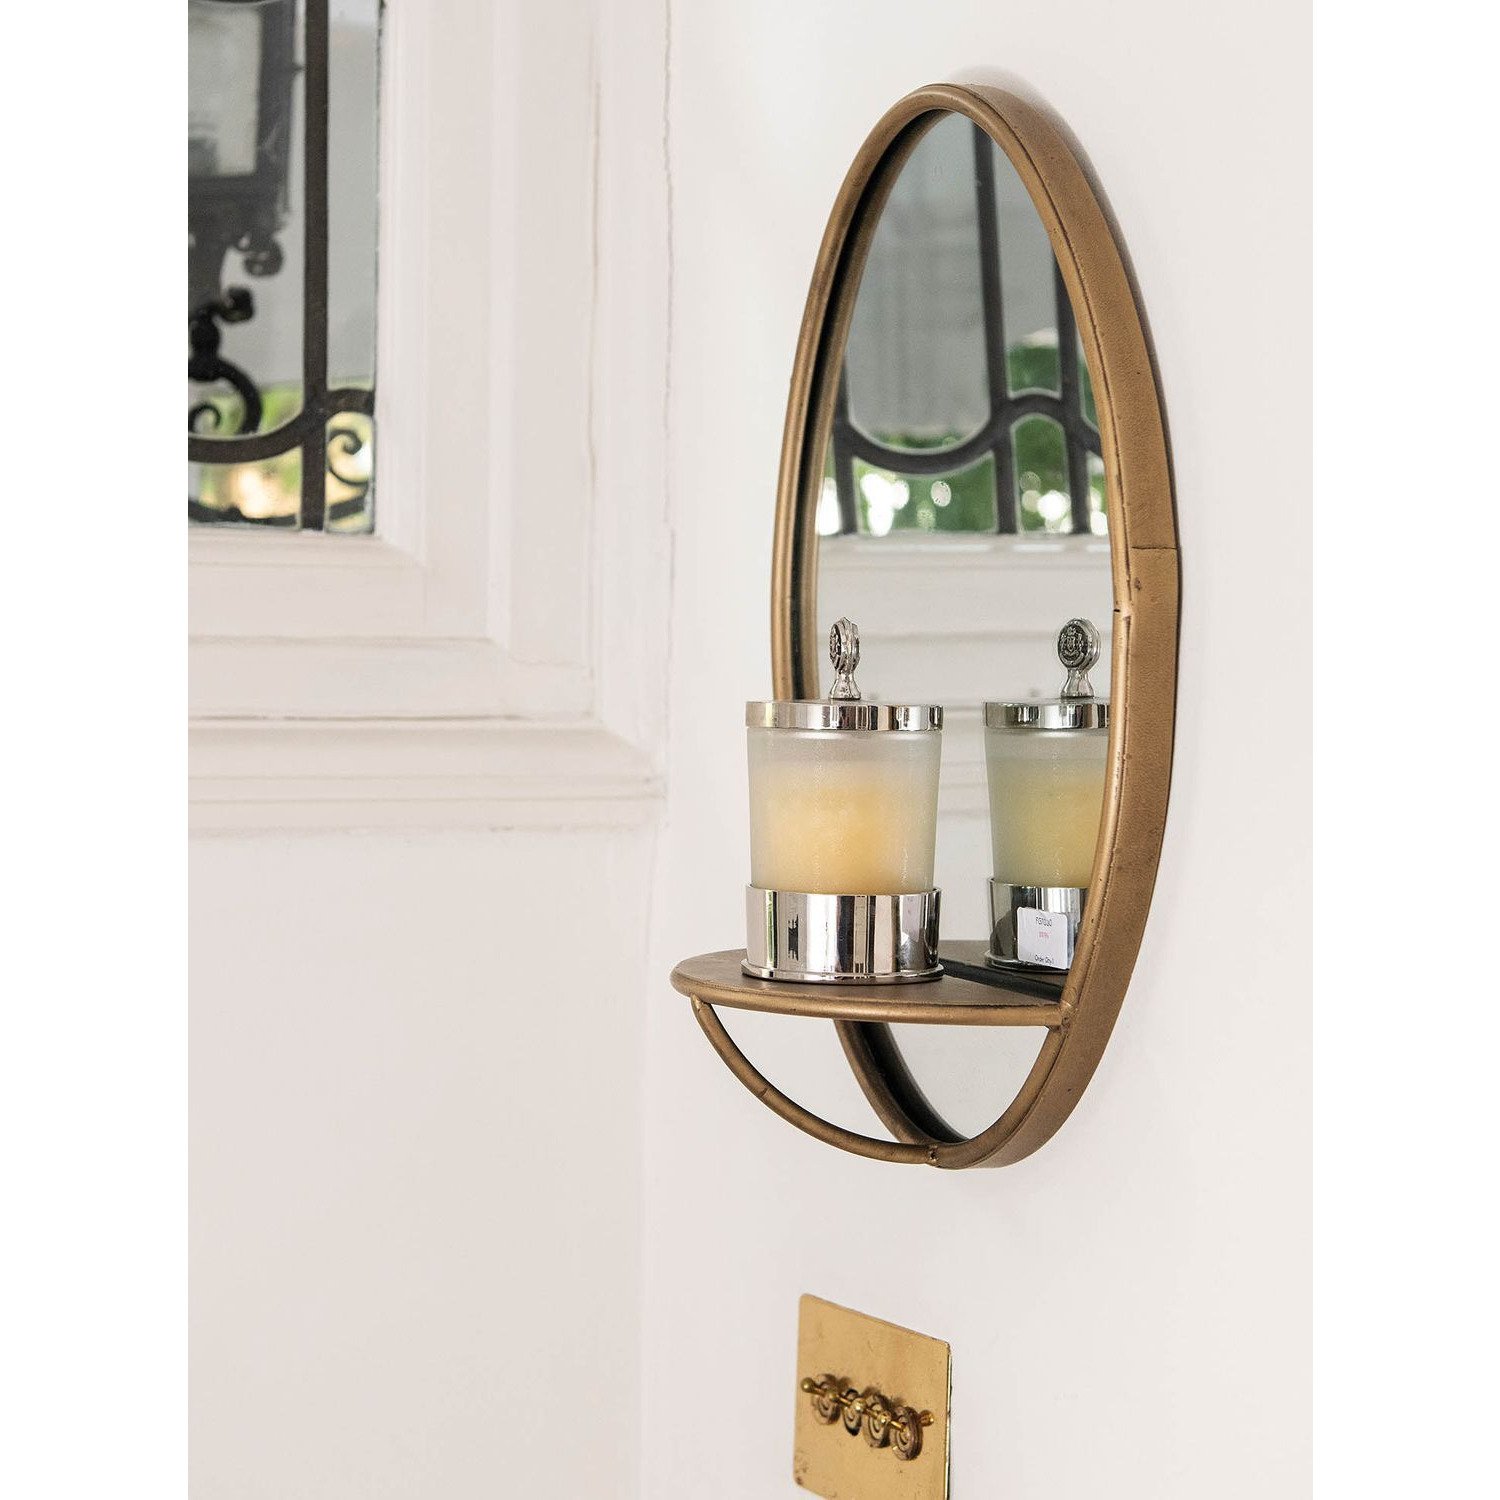 One.World Granville Oval Metal Wall Mirror with Shelf, 45 x 30.3cm, Brass - image 1